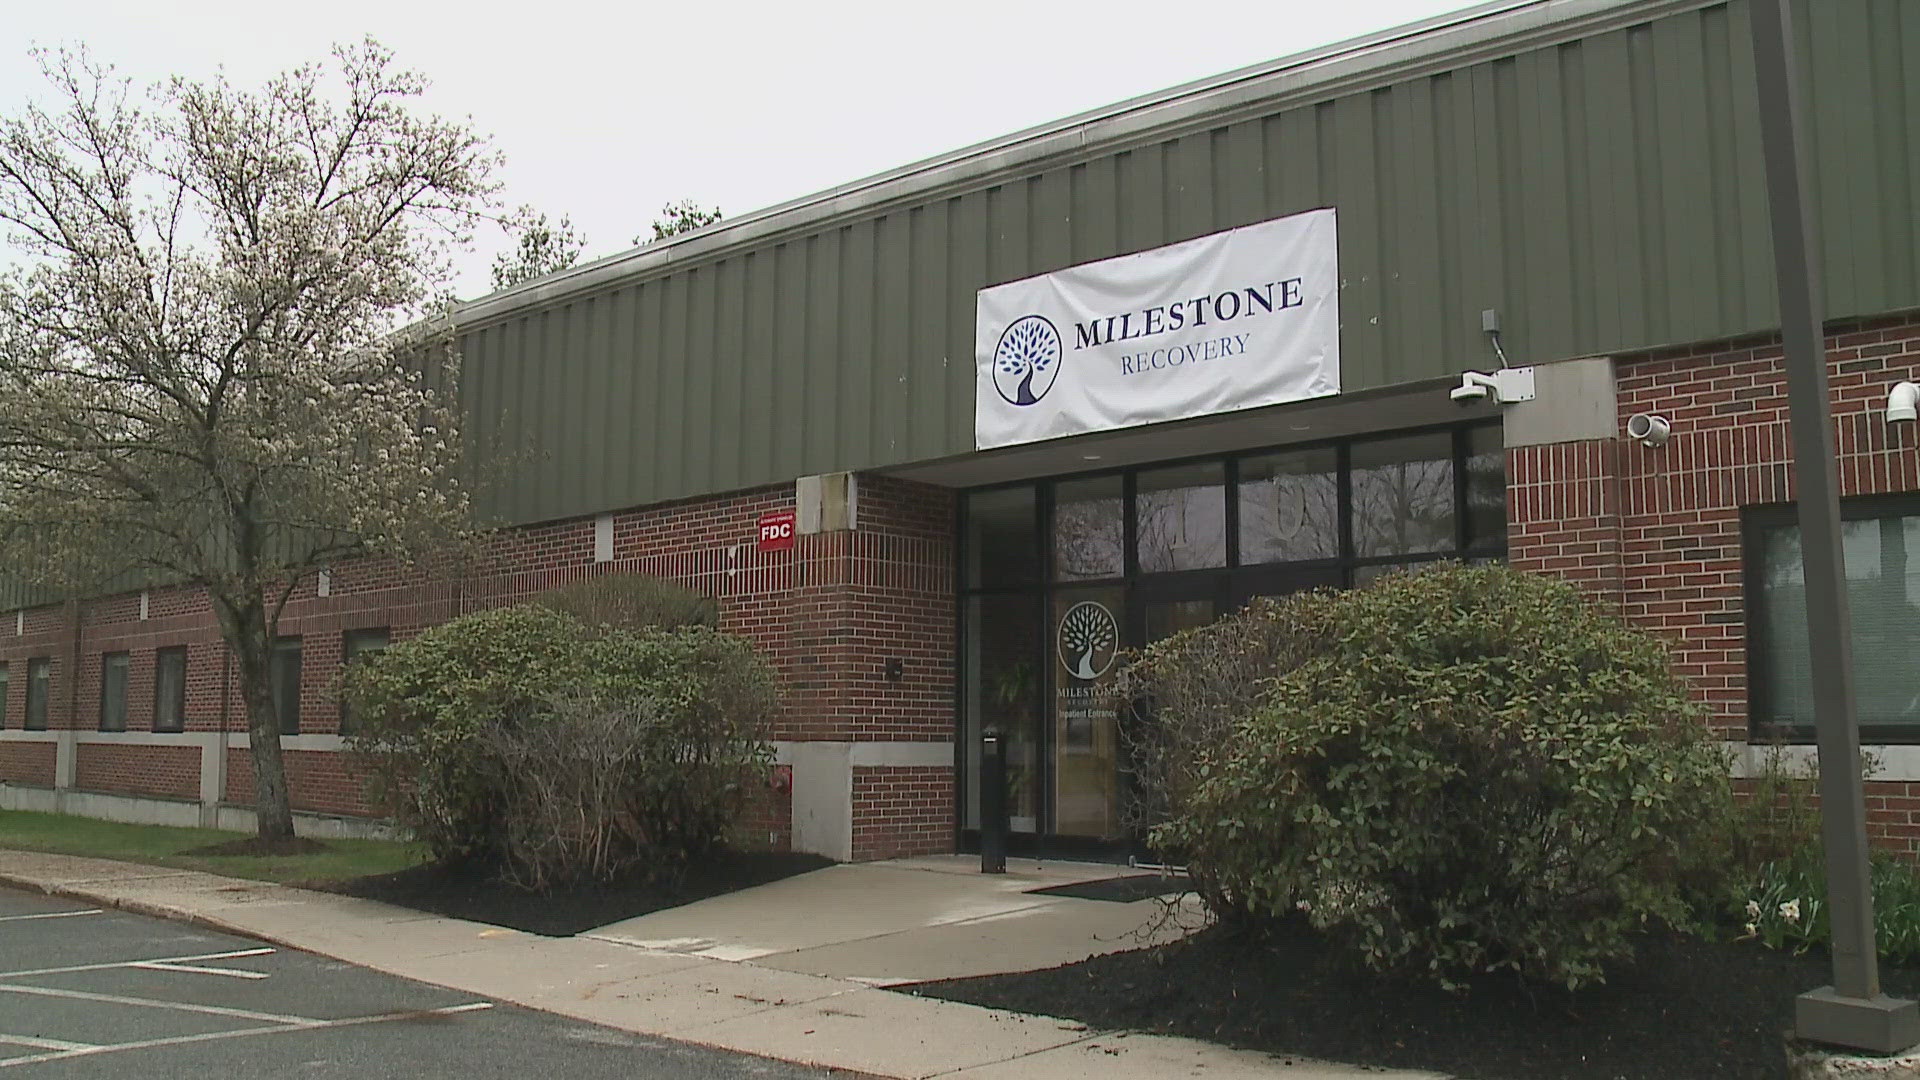 The new location will almost double the amount of beds available in Milestone Recovery's detoxification program.